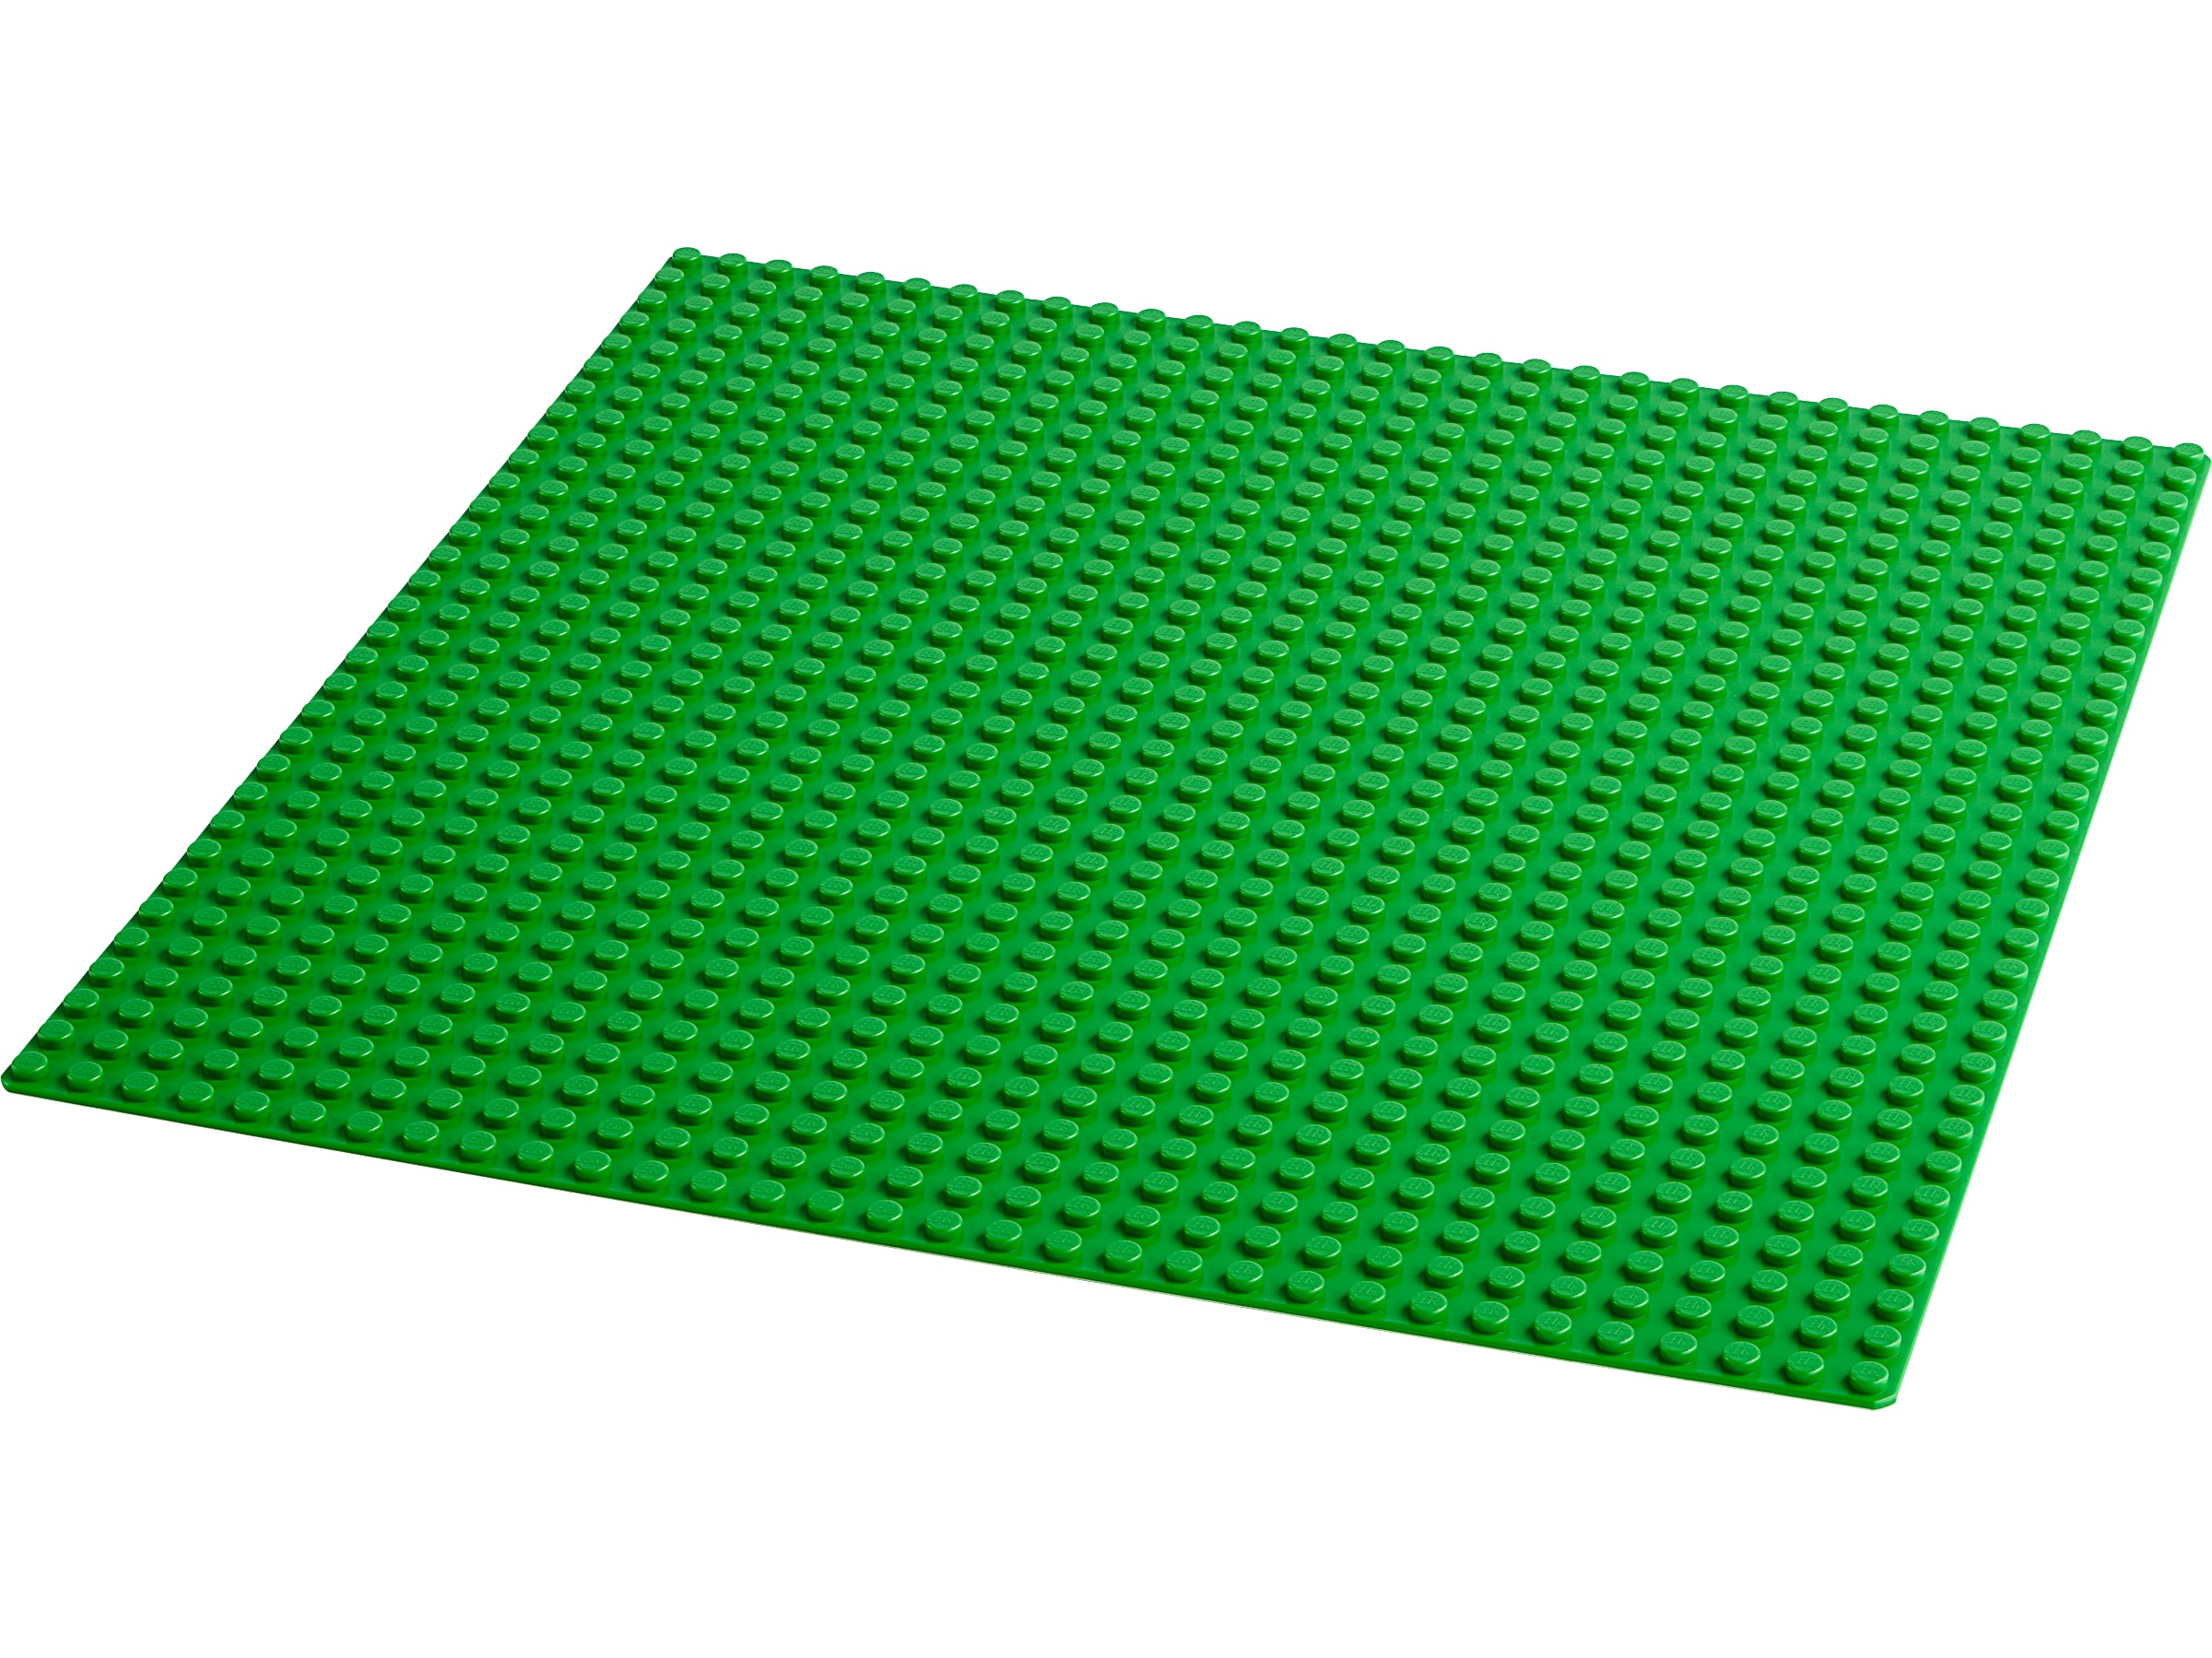 Lego Classic Green Baseplate 11023 Building Kit : Target